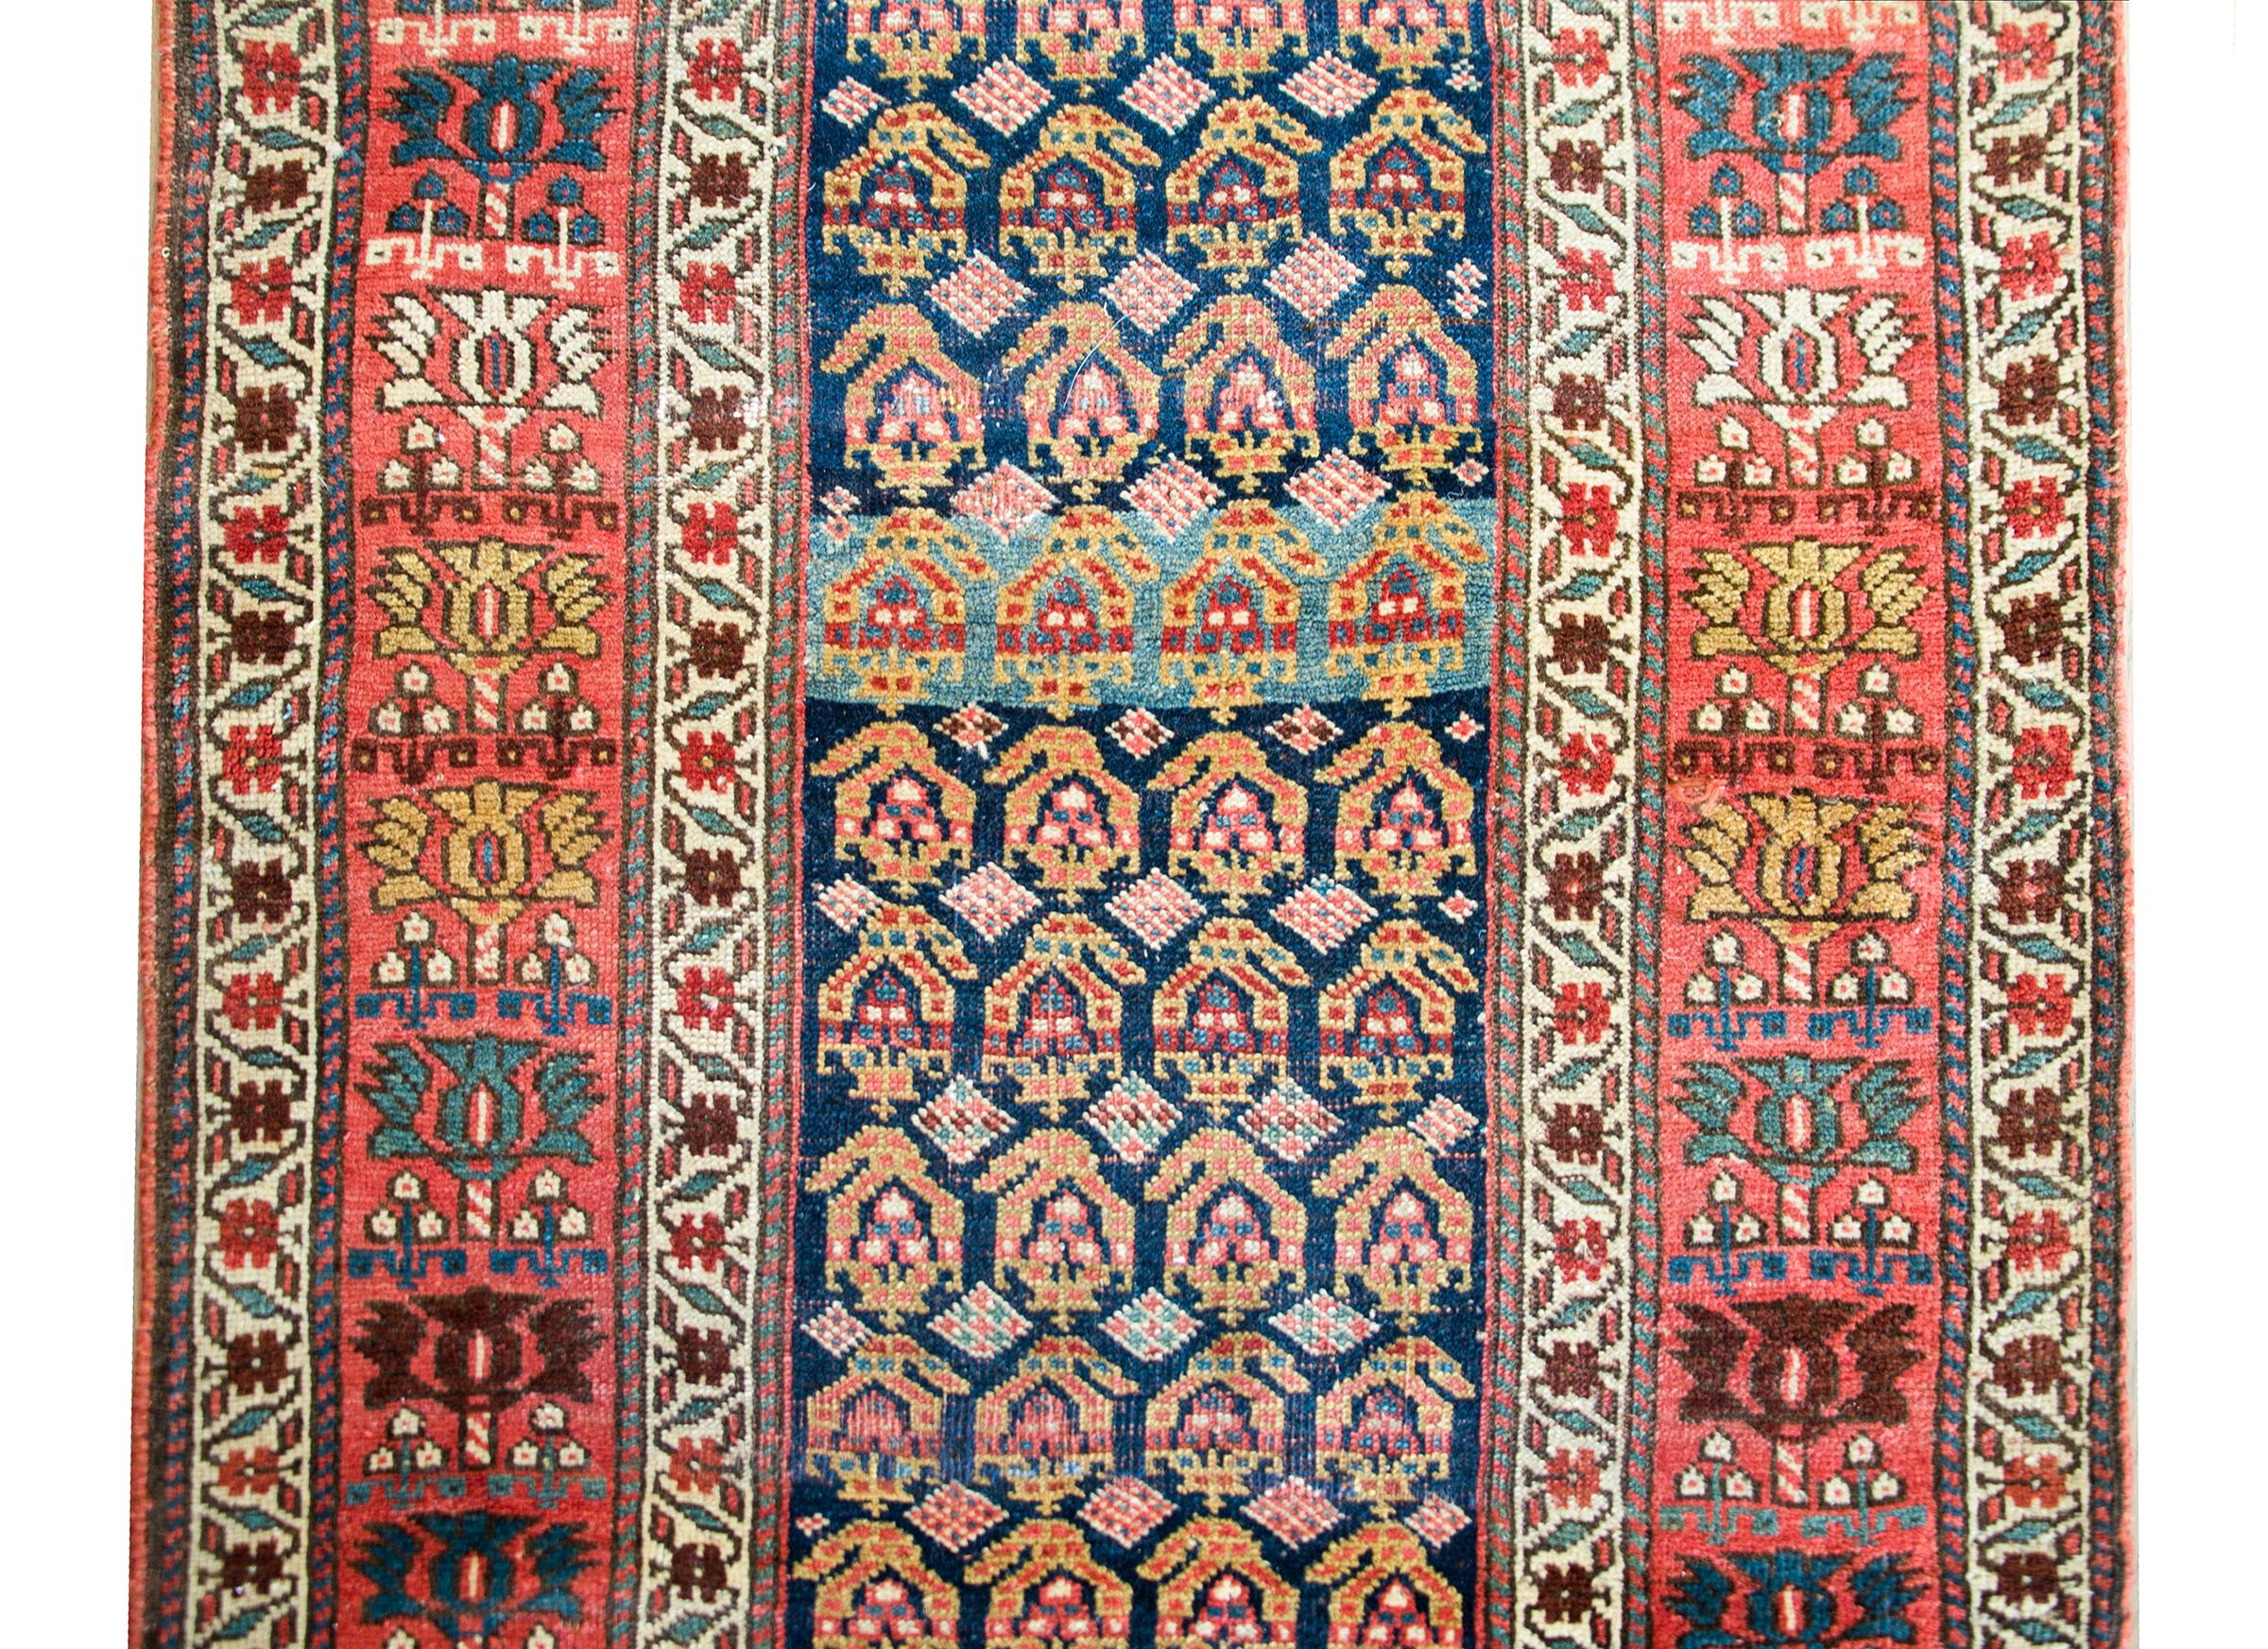 An incredible early 20th century Persian Bidjar runner with an all-over paisley pattern woven in crimson, gold, indigo, and cream, and surrounded by a complex border composed of multiple stylized flowers.